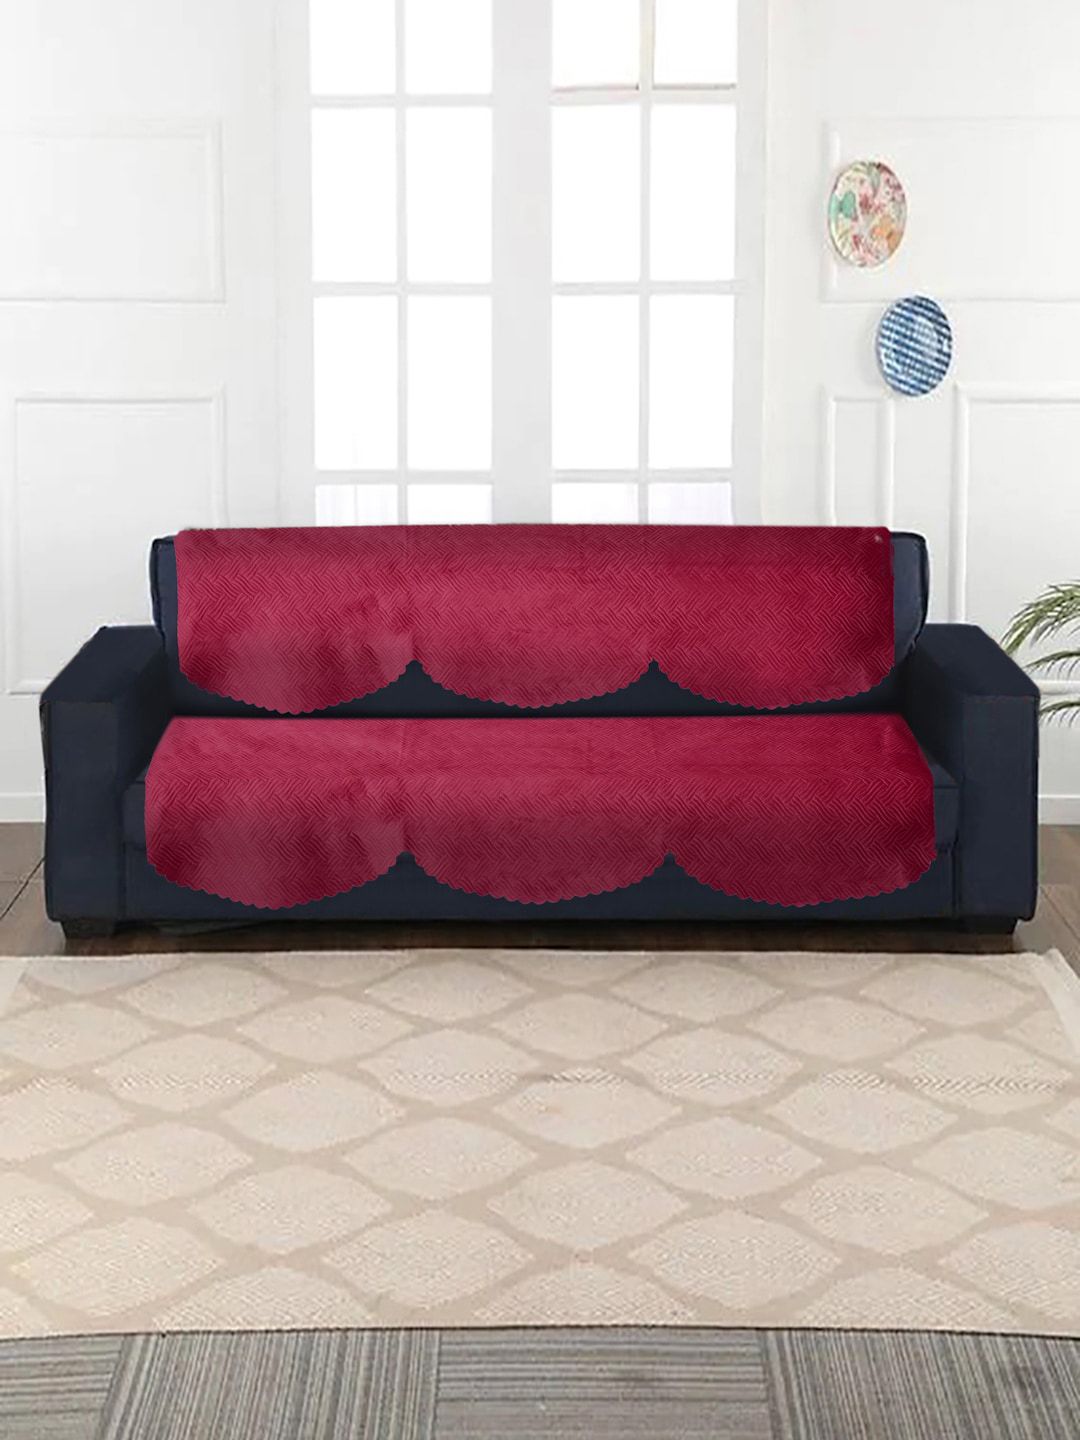 HOSTA HOMES Set Of 6 Maroon Jacquard Velvet Quilted Self Design 3 Seater Sofa Cover Price in India